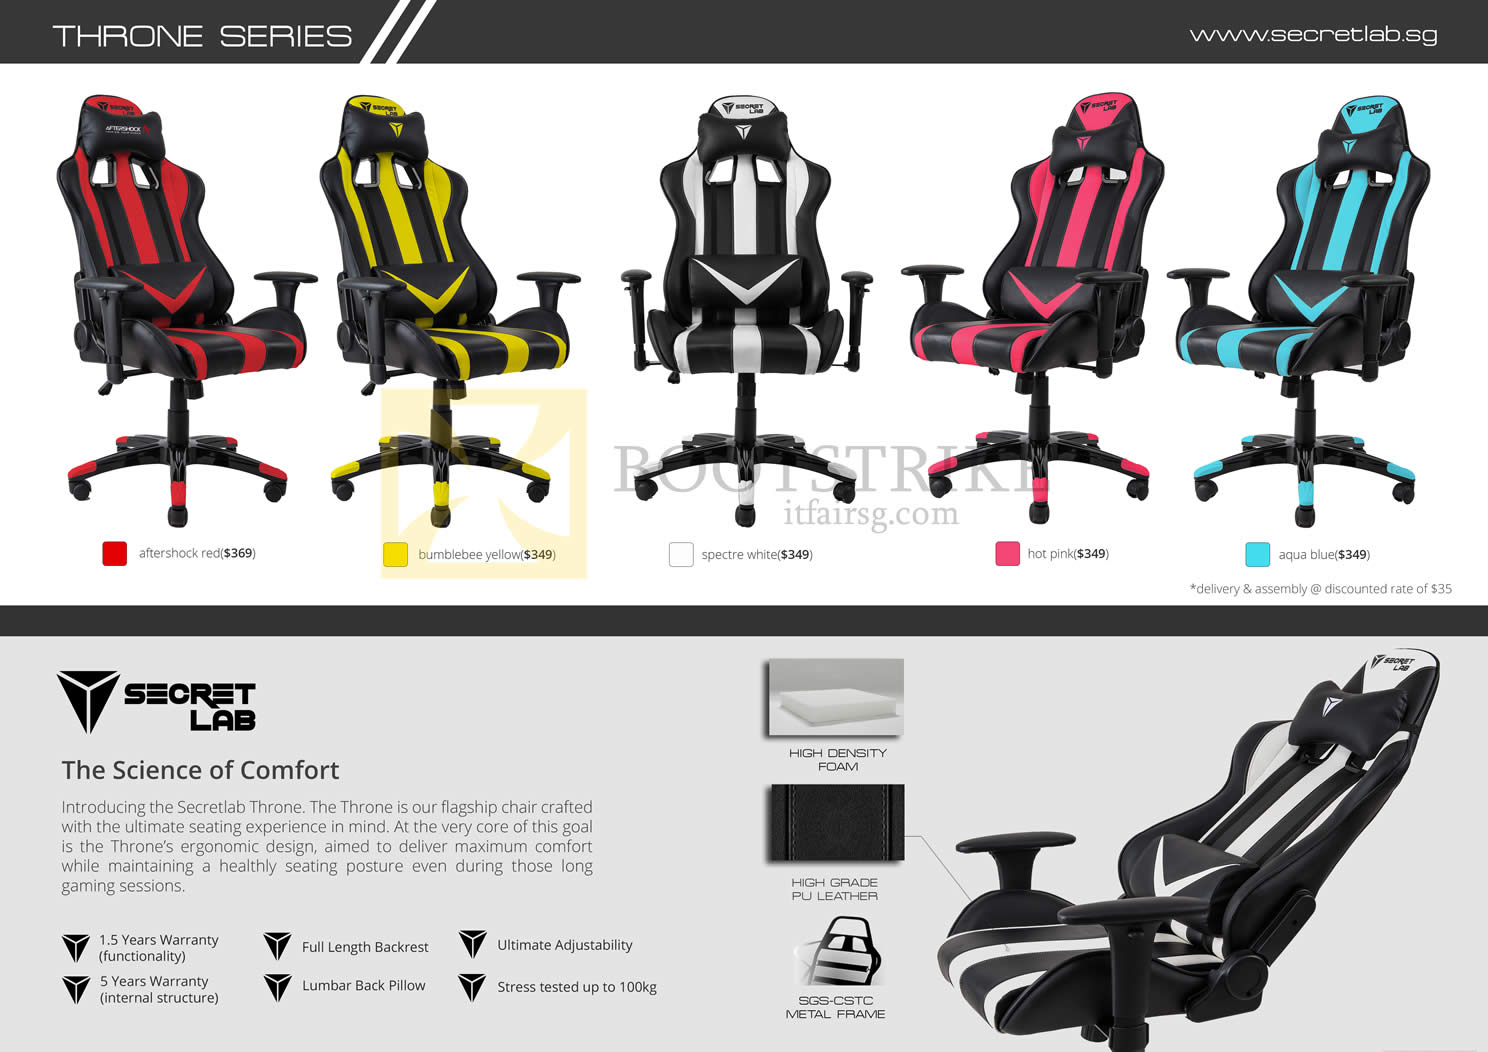 COMEX 2015 price list image brochure of Aftershock Secret Lab Gaming Seats Red, Bumblebee Yellow, Spectre White, Hot Pink, Aqua Blue